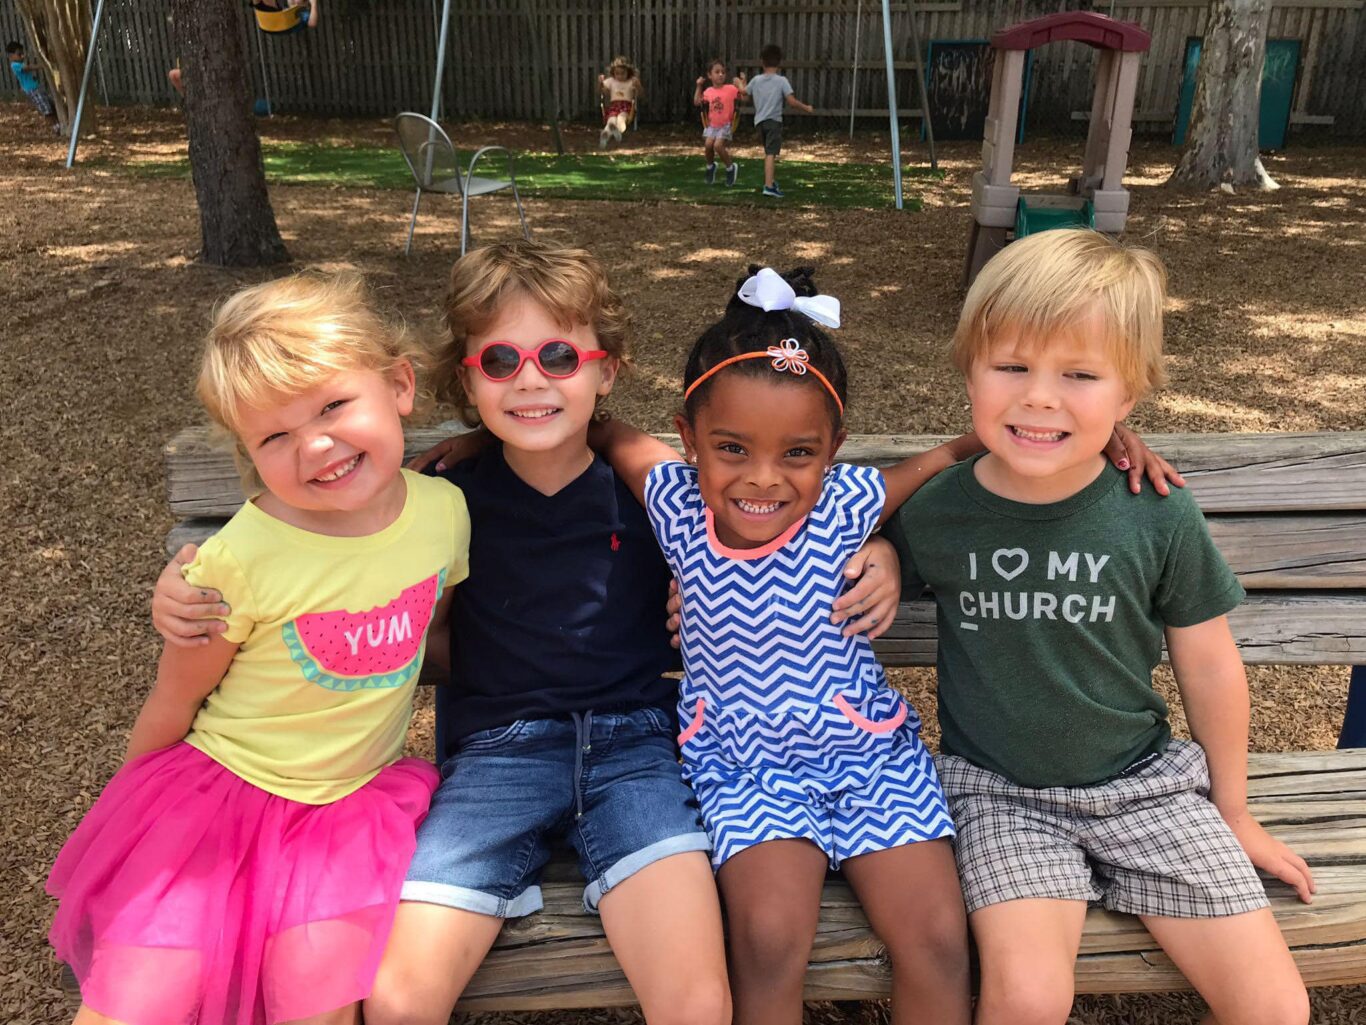 Four preschool children posing for a picture on a park bench.